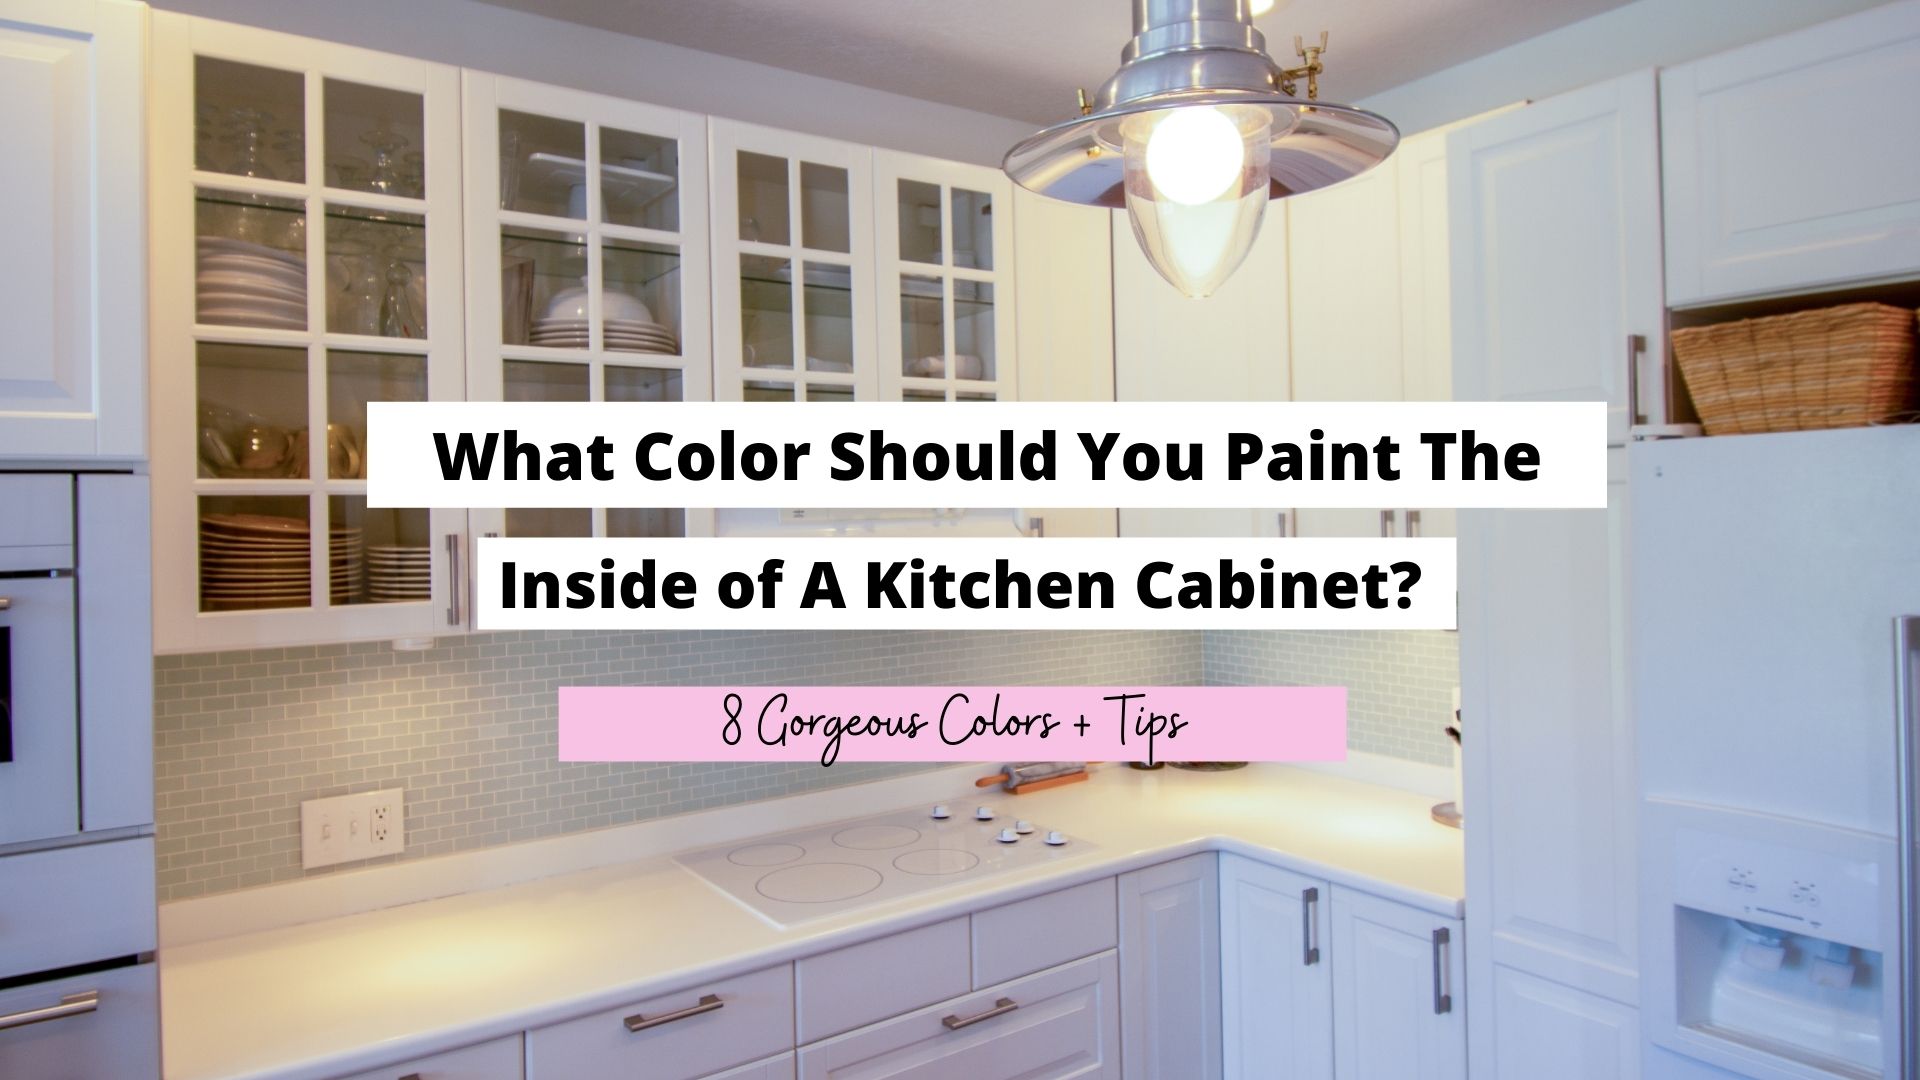 Paint The Inside Of Kitchen Cabinets, Can I Paint The Inside Of Kitchen Cabinets